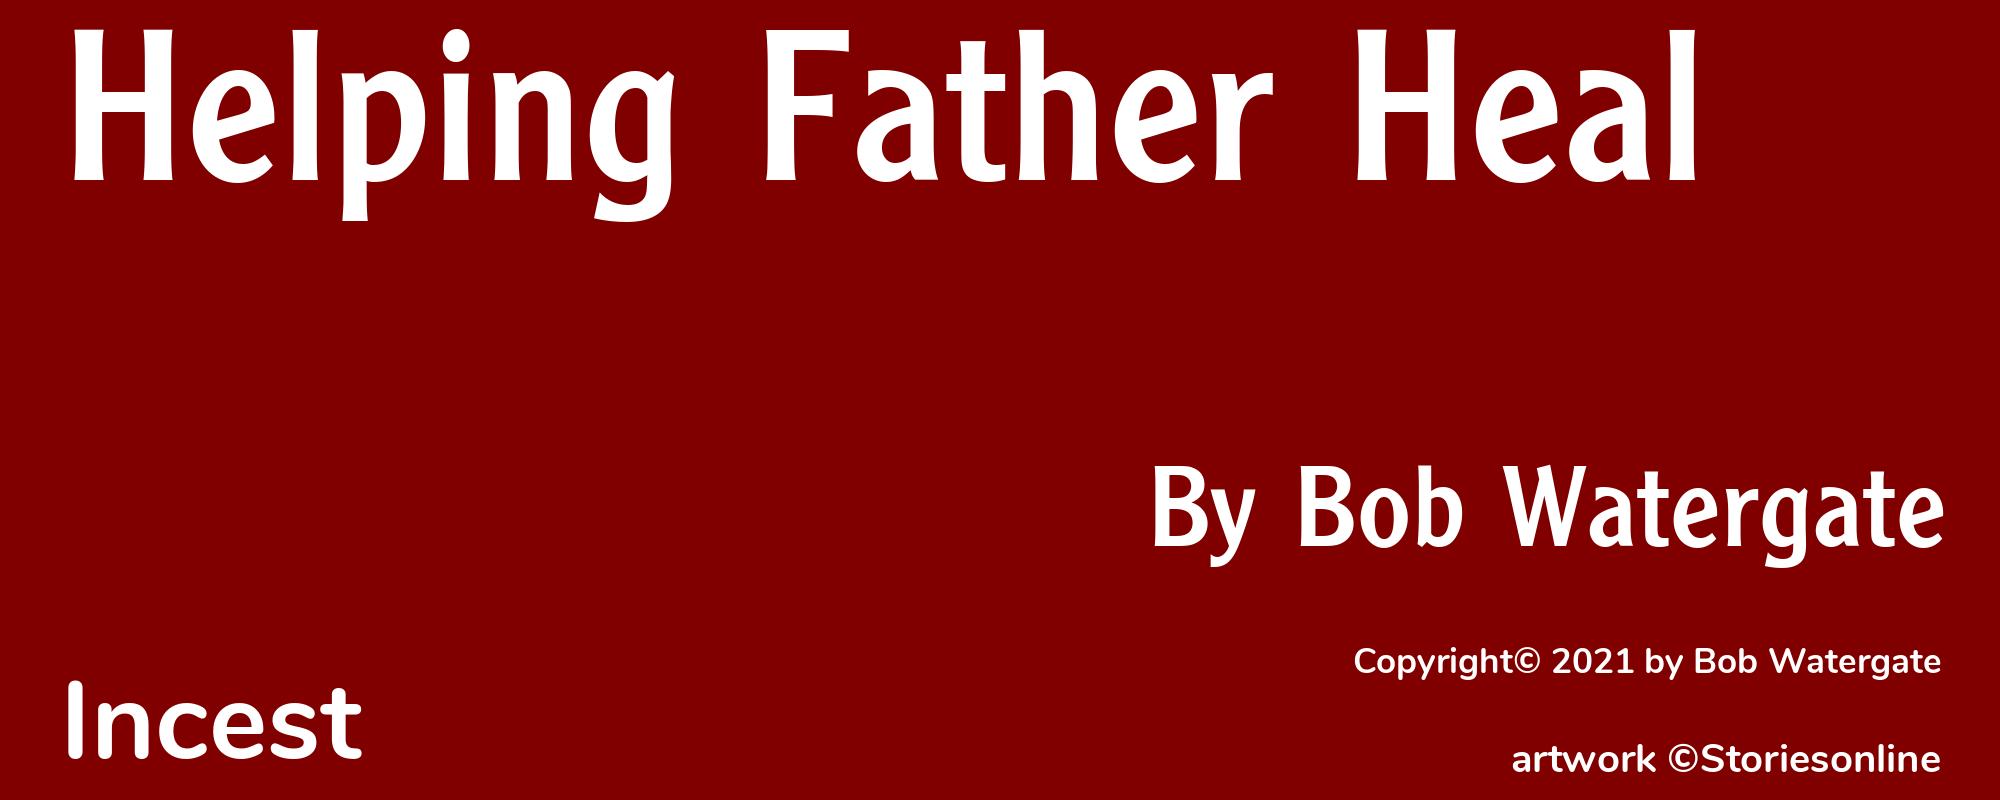 Helping Father Heal - Cover